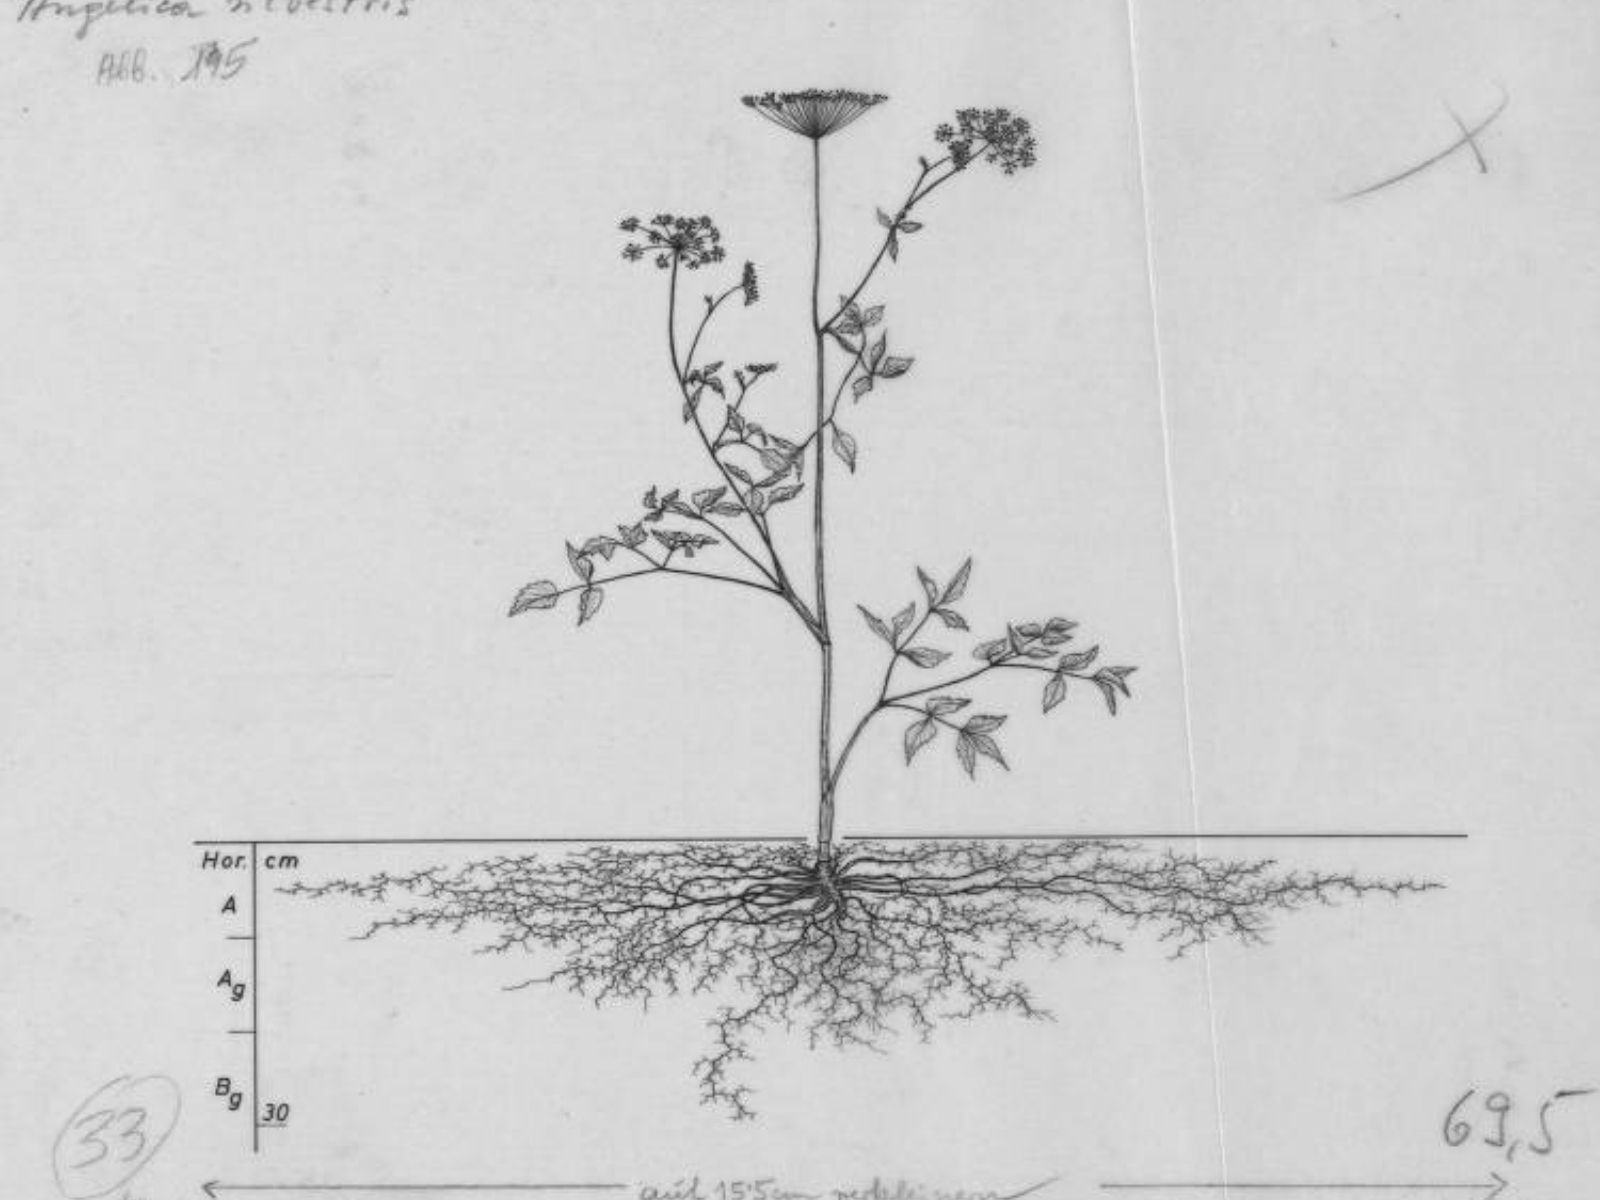 Flower complex root system shown in incredible archived drawings on Thursd